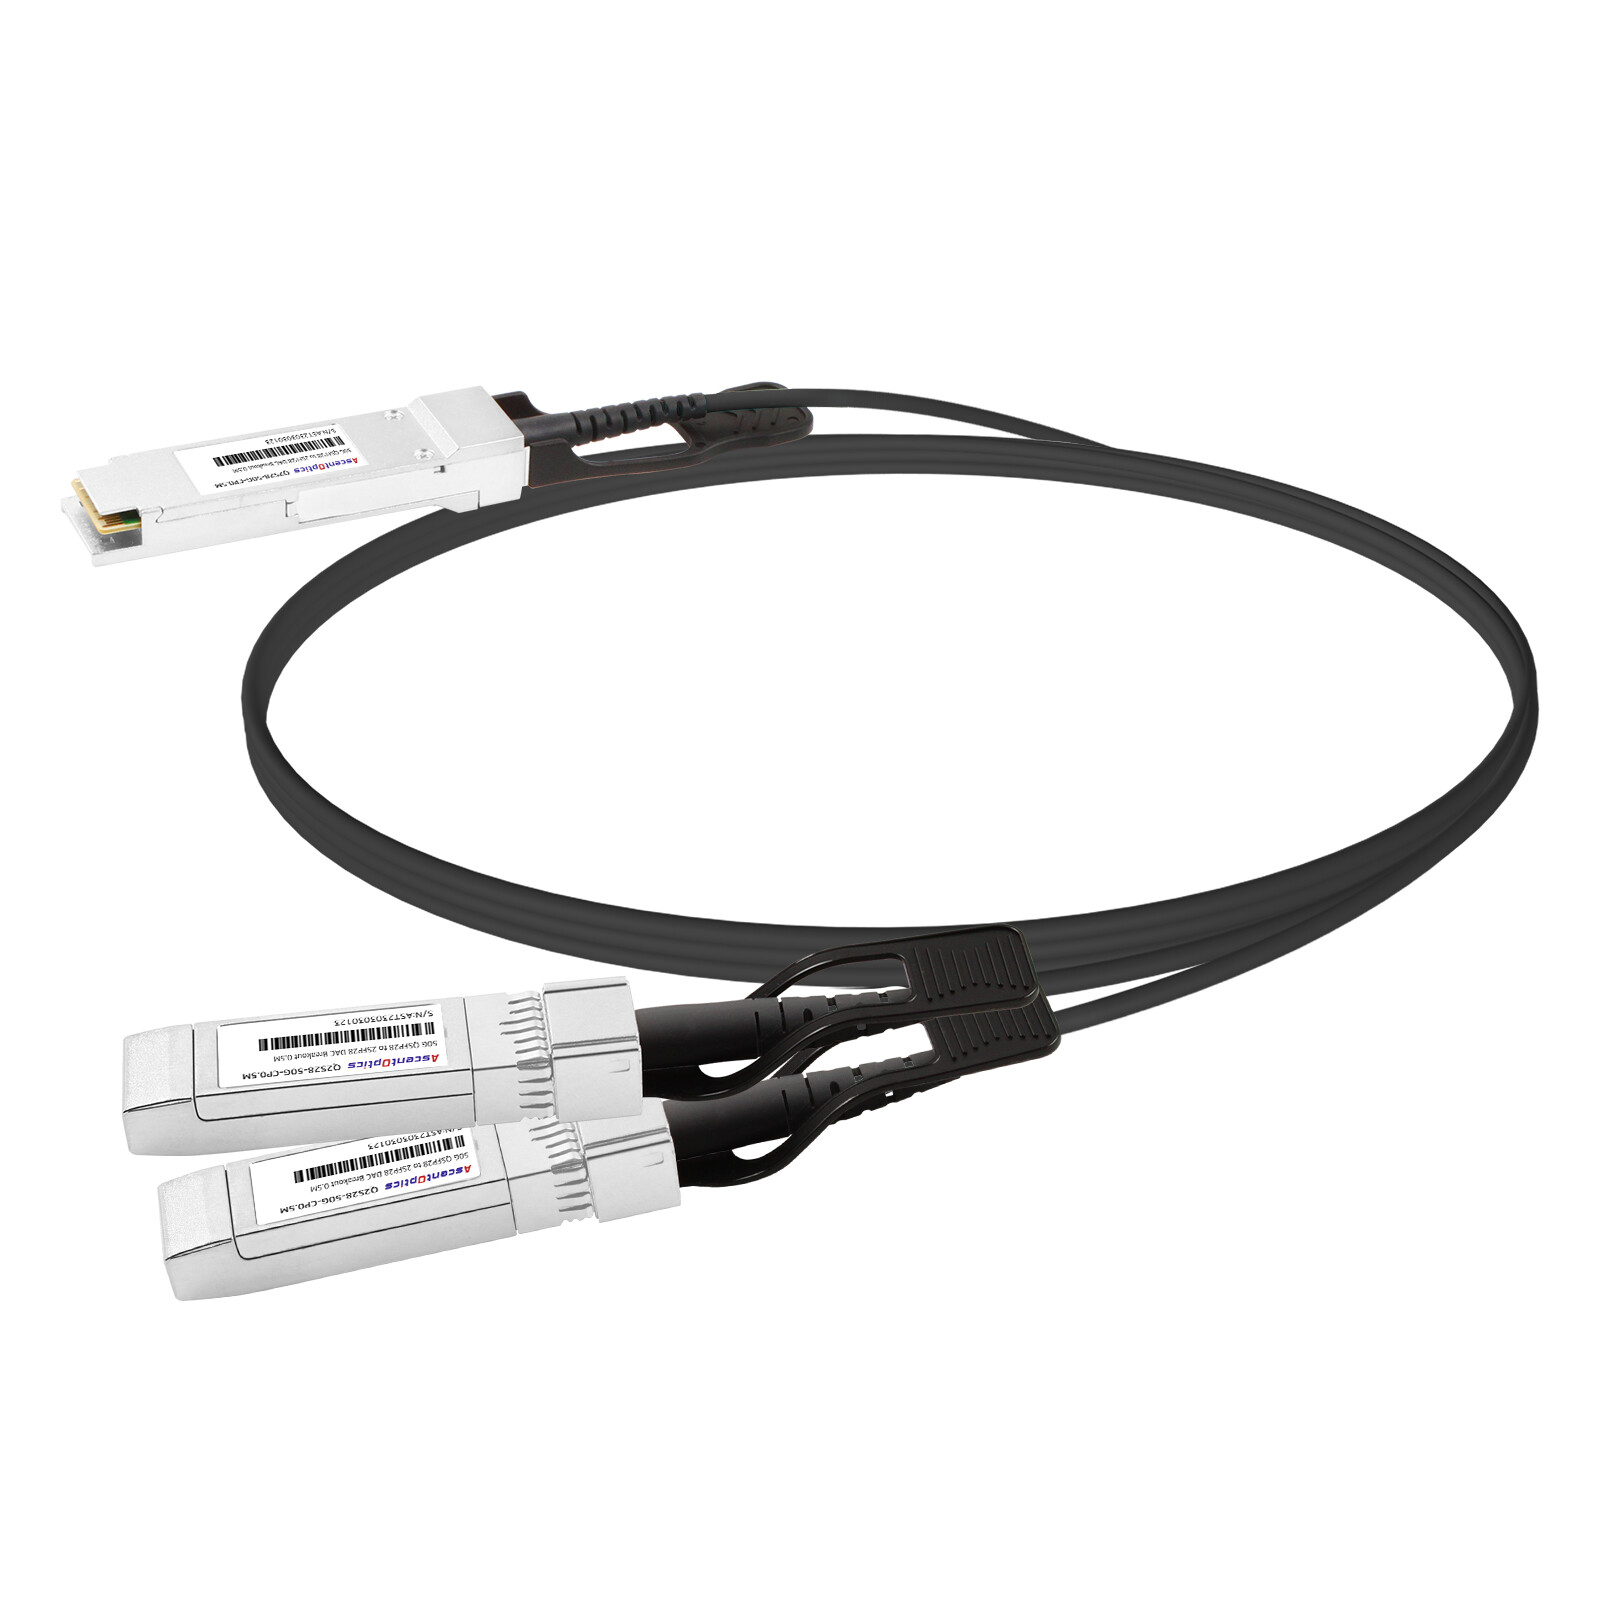 50G QSFP28 to 2x 25G SFP28 Copper Breakout Cable,0.5 Meter,Passive